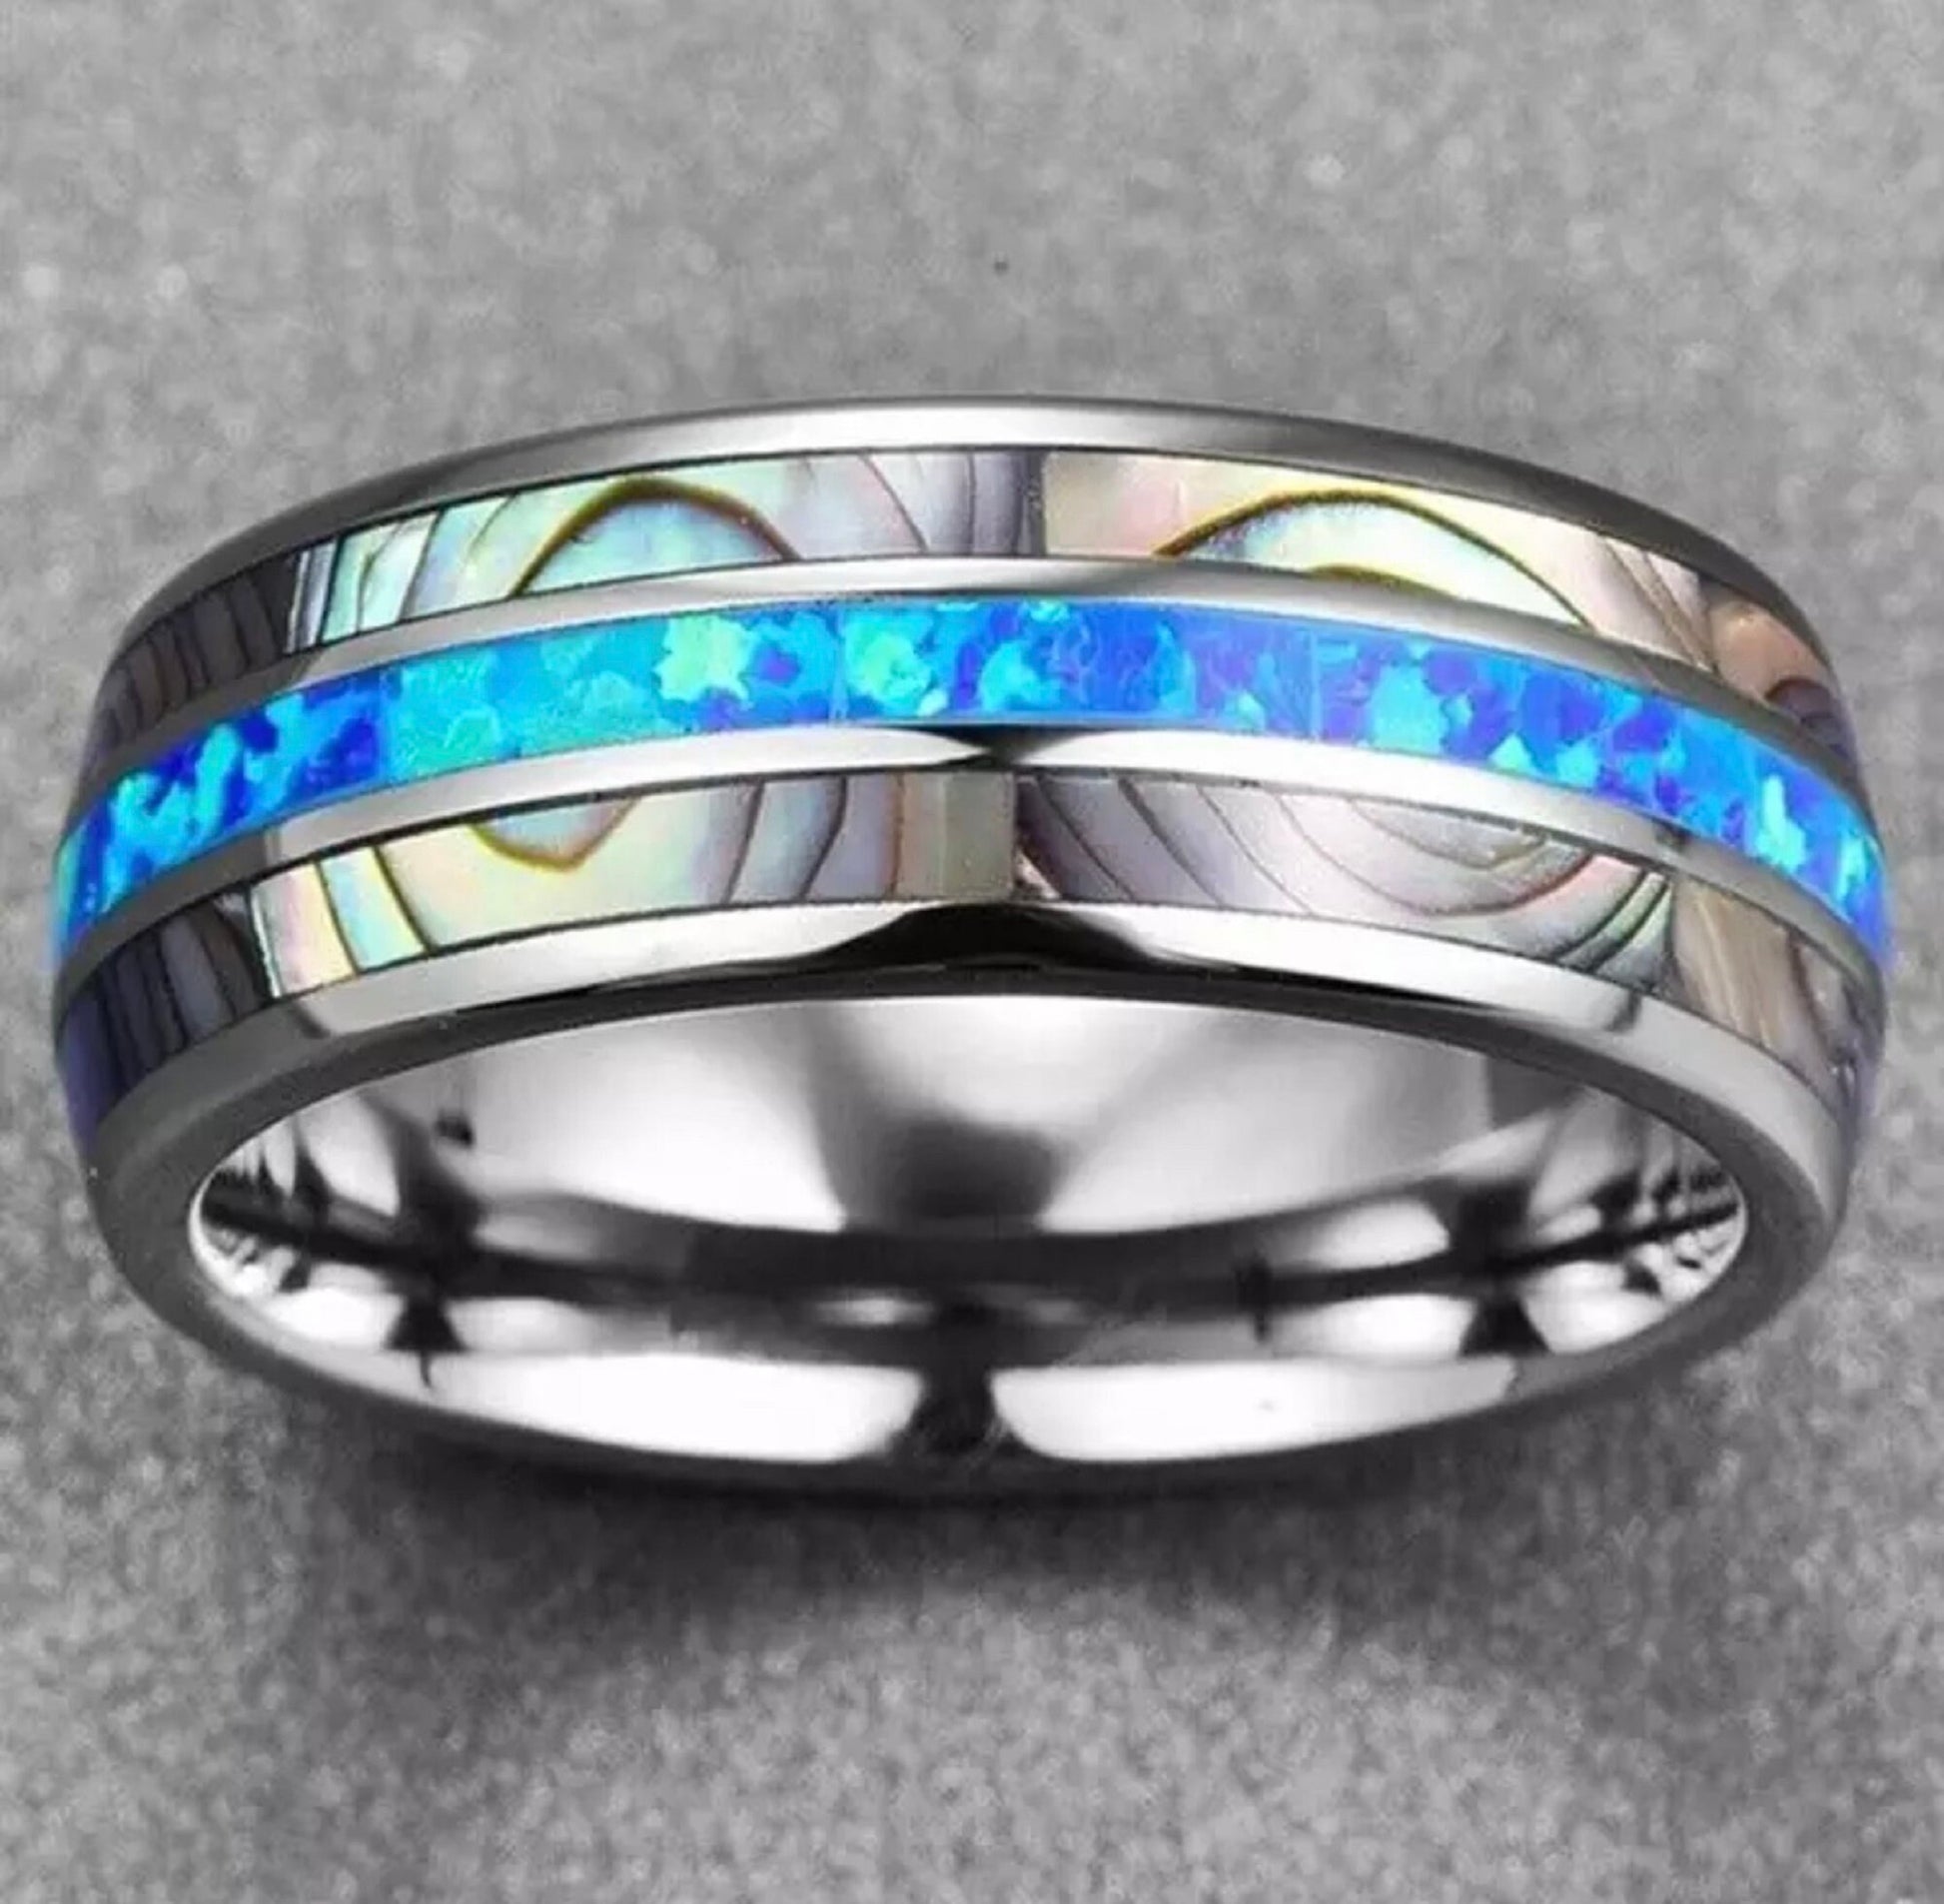 Blue Abalone Shell Inlay Ring Stainless Steel - Friendship, Promise, Engagement, Wedding Jewelry Gift, Anniversary, Mother's Day